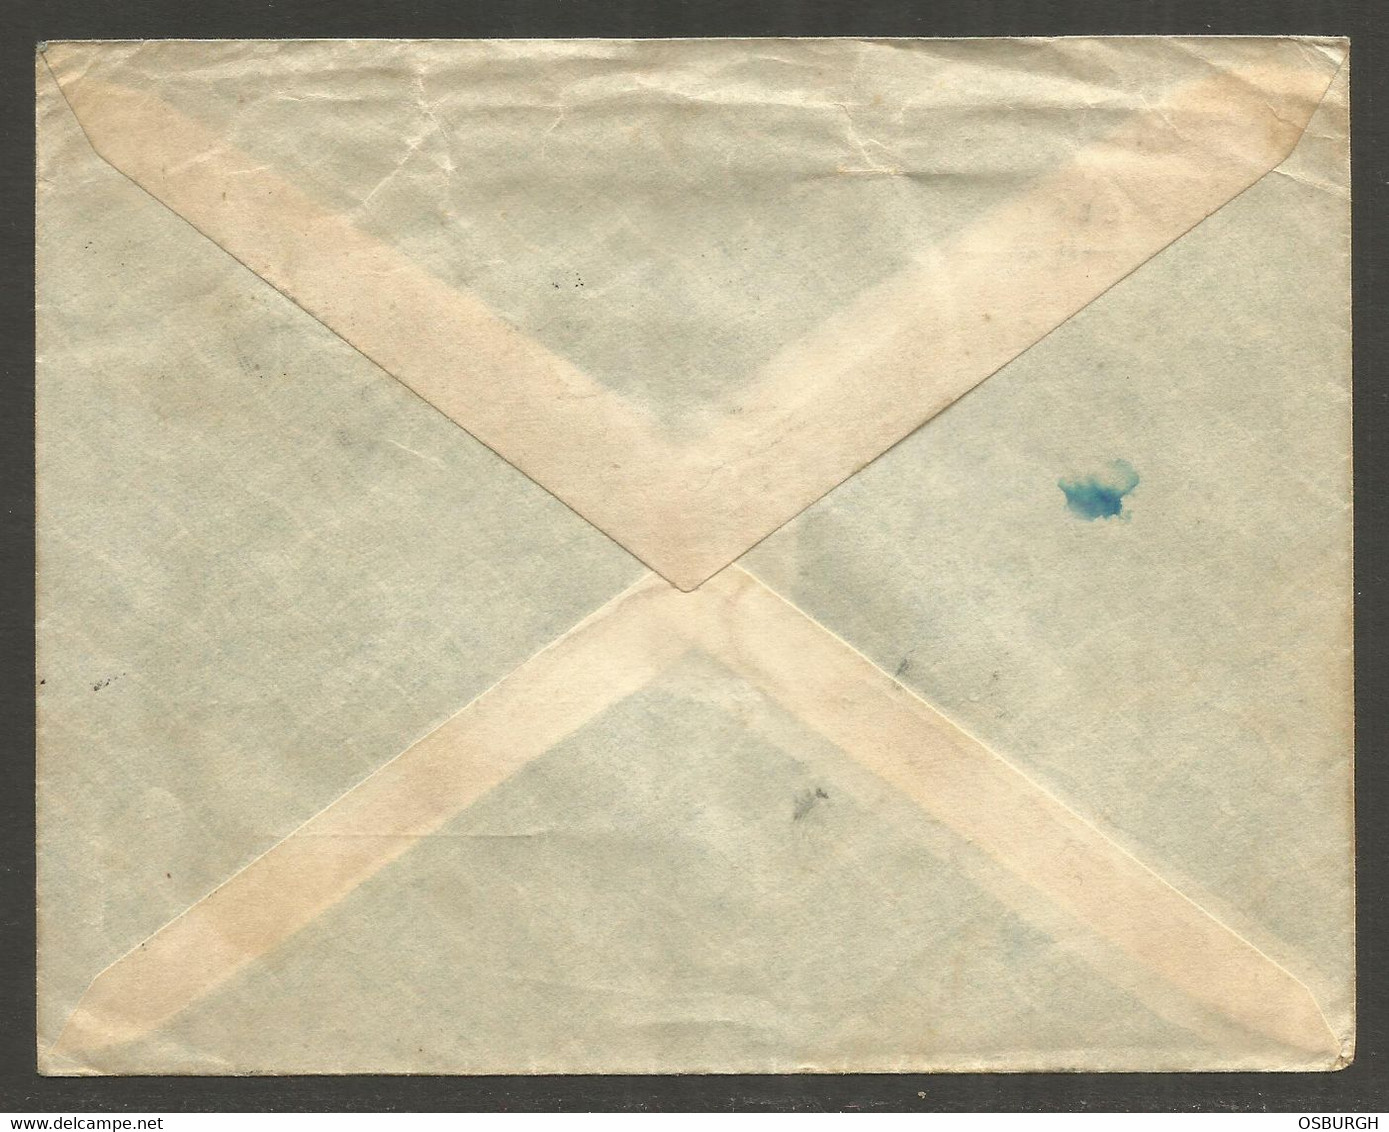 TURKEY. 1928. COVER. NAZILLI. SEREF CEM. ADDRESSED TO MIAMI. - Lettres & Documents